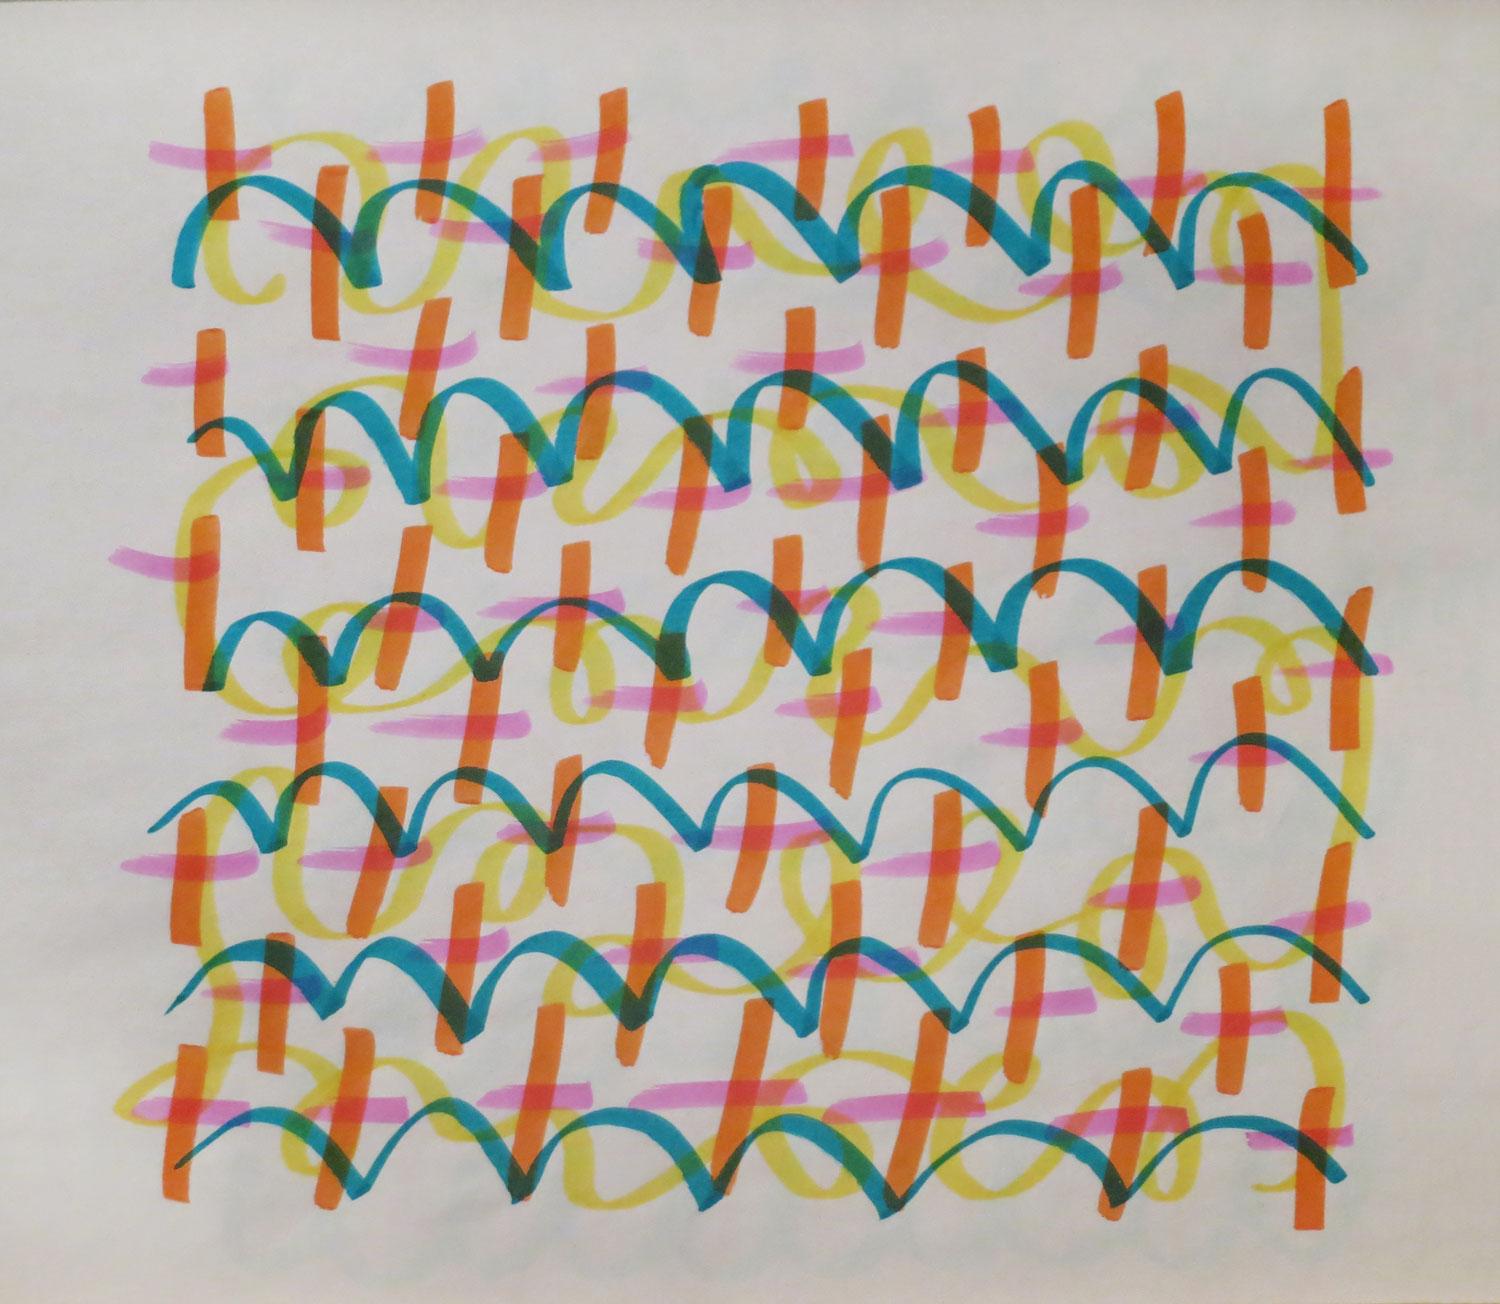 In this marker drawing, a repeated pattern of 6 rows consists of plus marks in orange and pink, blue lines shaped like repeating lowercase *m*s, and a yellow line of irregular loops and arcs that snakes through all six rows.